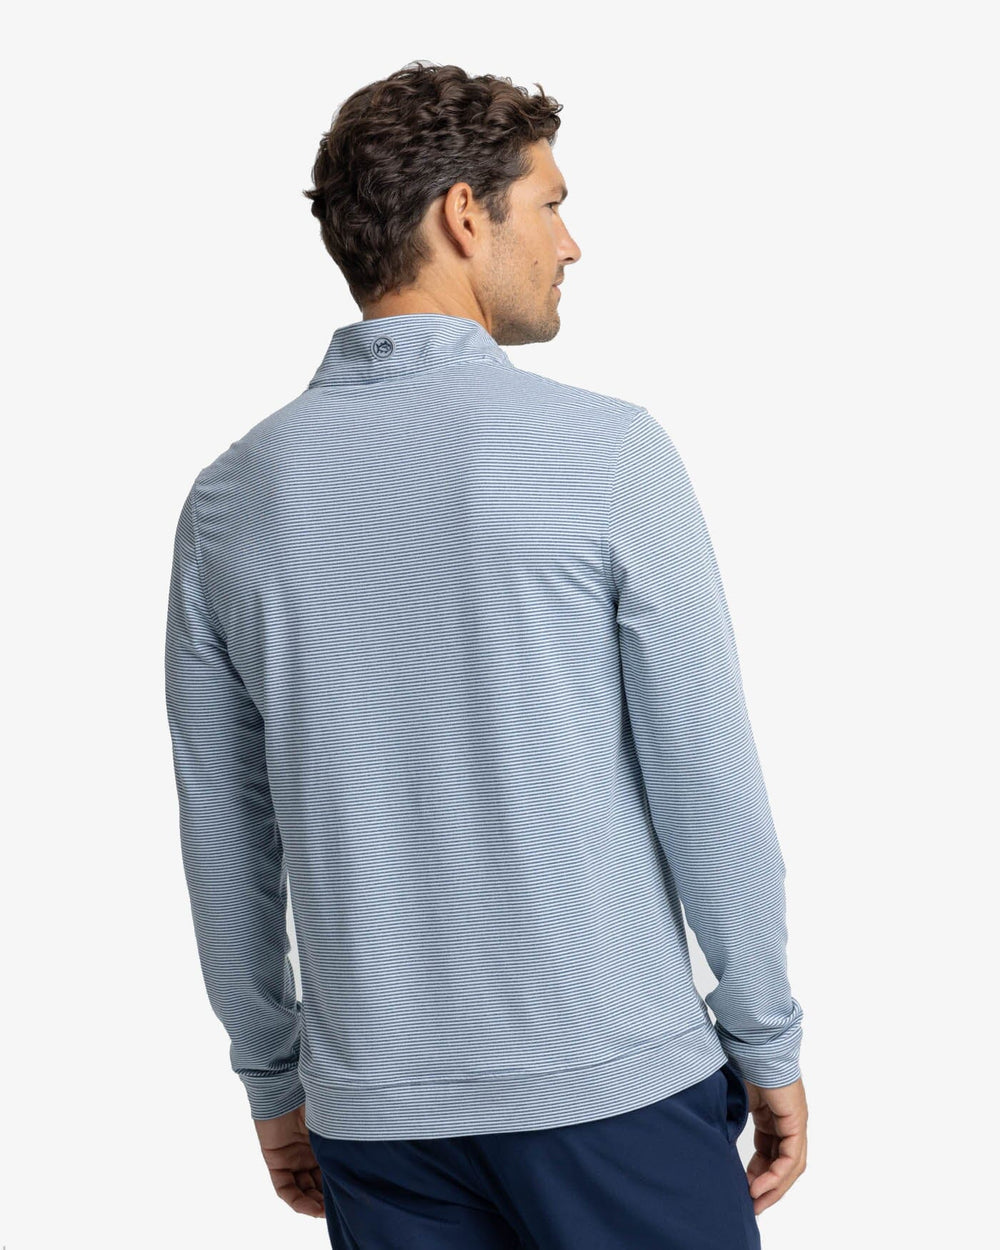 The back view of the Southern Tide Cruiser Heather Micro-Stripe Performance Quarter Zip Pullover by Southern Tide - Heather Dream Blue